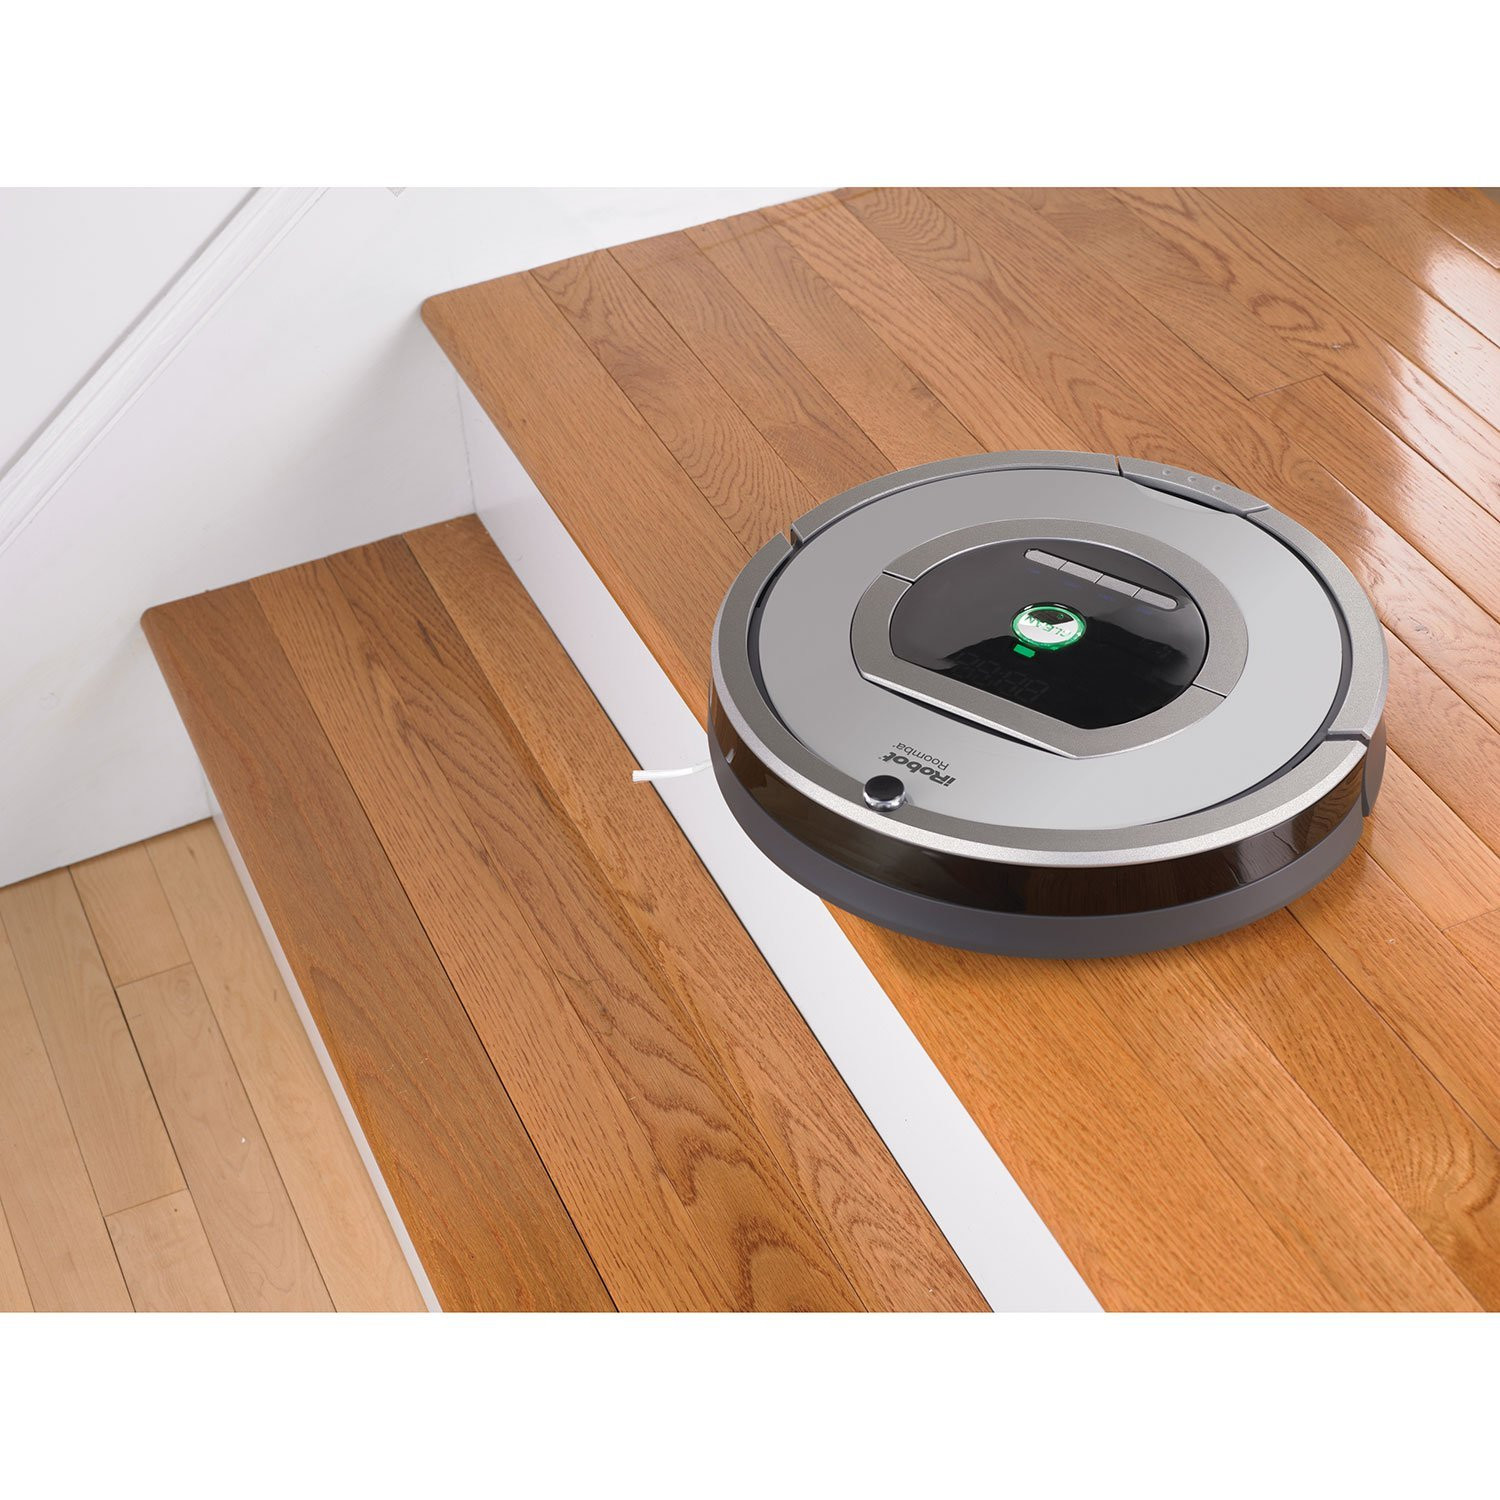 29 Stylish Best Roomba for Pets and Hardwood Floors 2024 free download best roomba for pets and hardwood floors of irobot roomba 761 robot vacuum brillo tech within the irobot roomba 761 goes on cleaning duty at the touch of a button thoroughly vacuuming even h